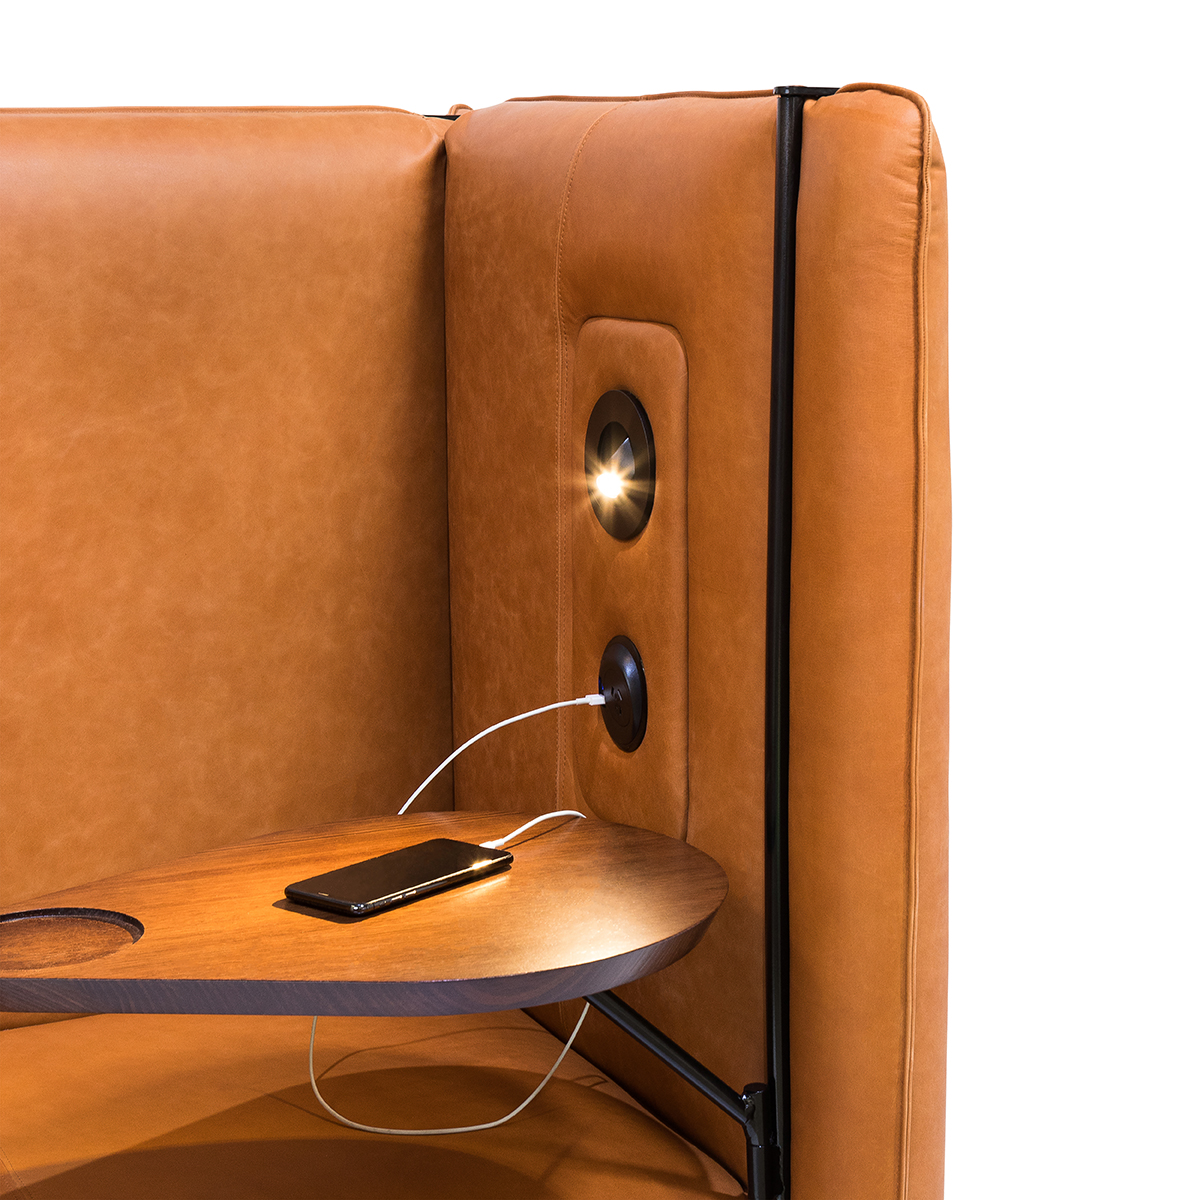 Detail photography of a leather booth lounge. Taken for a furniture manufacturer.